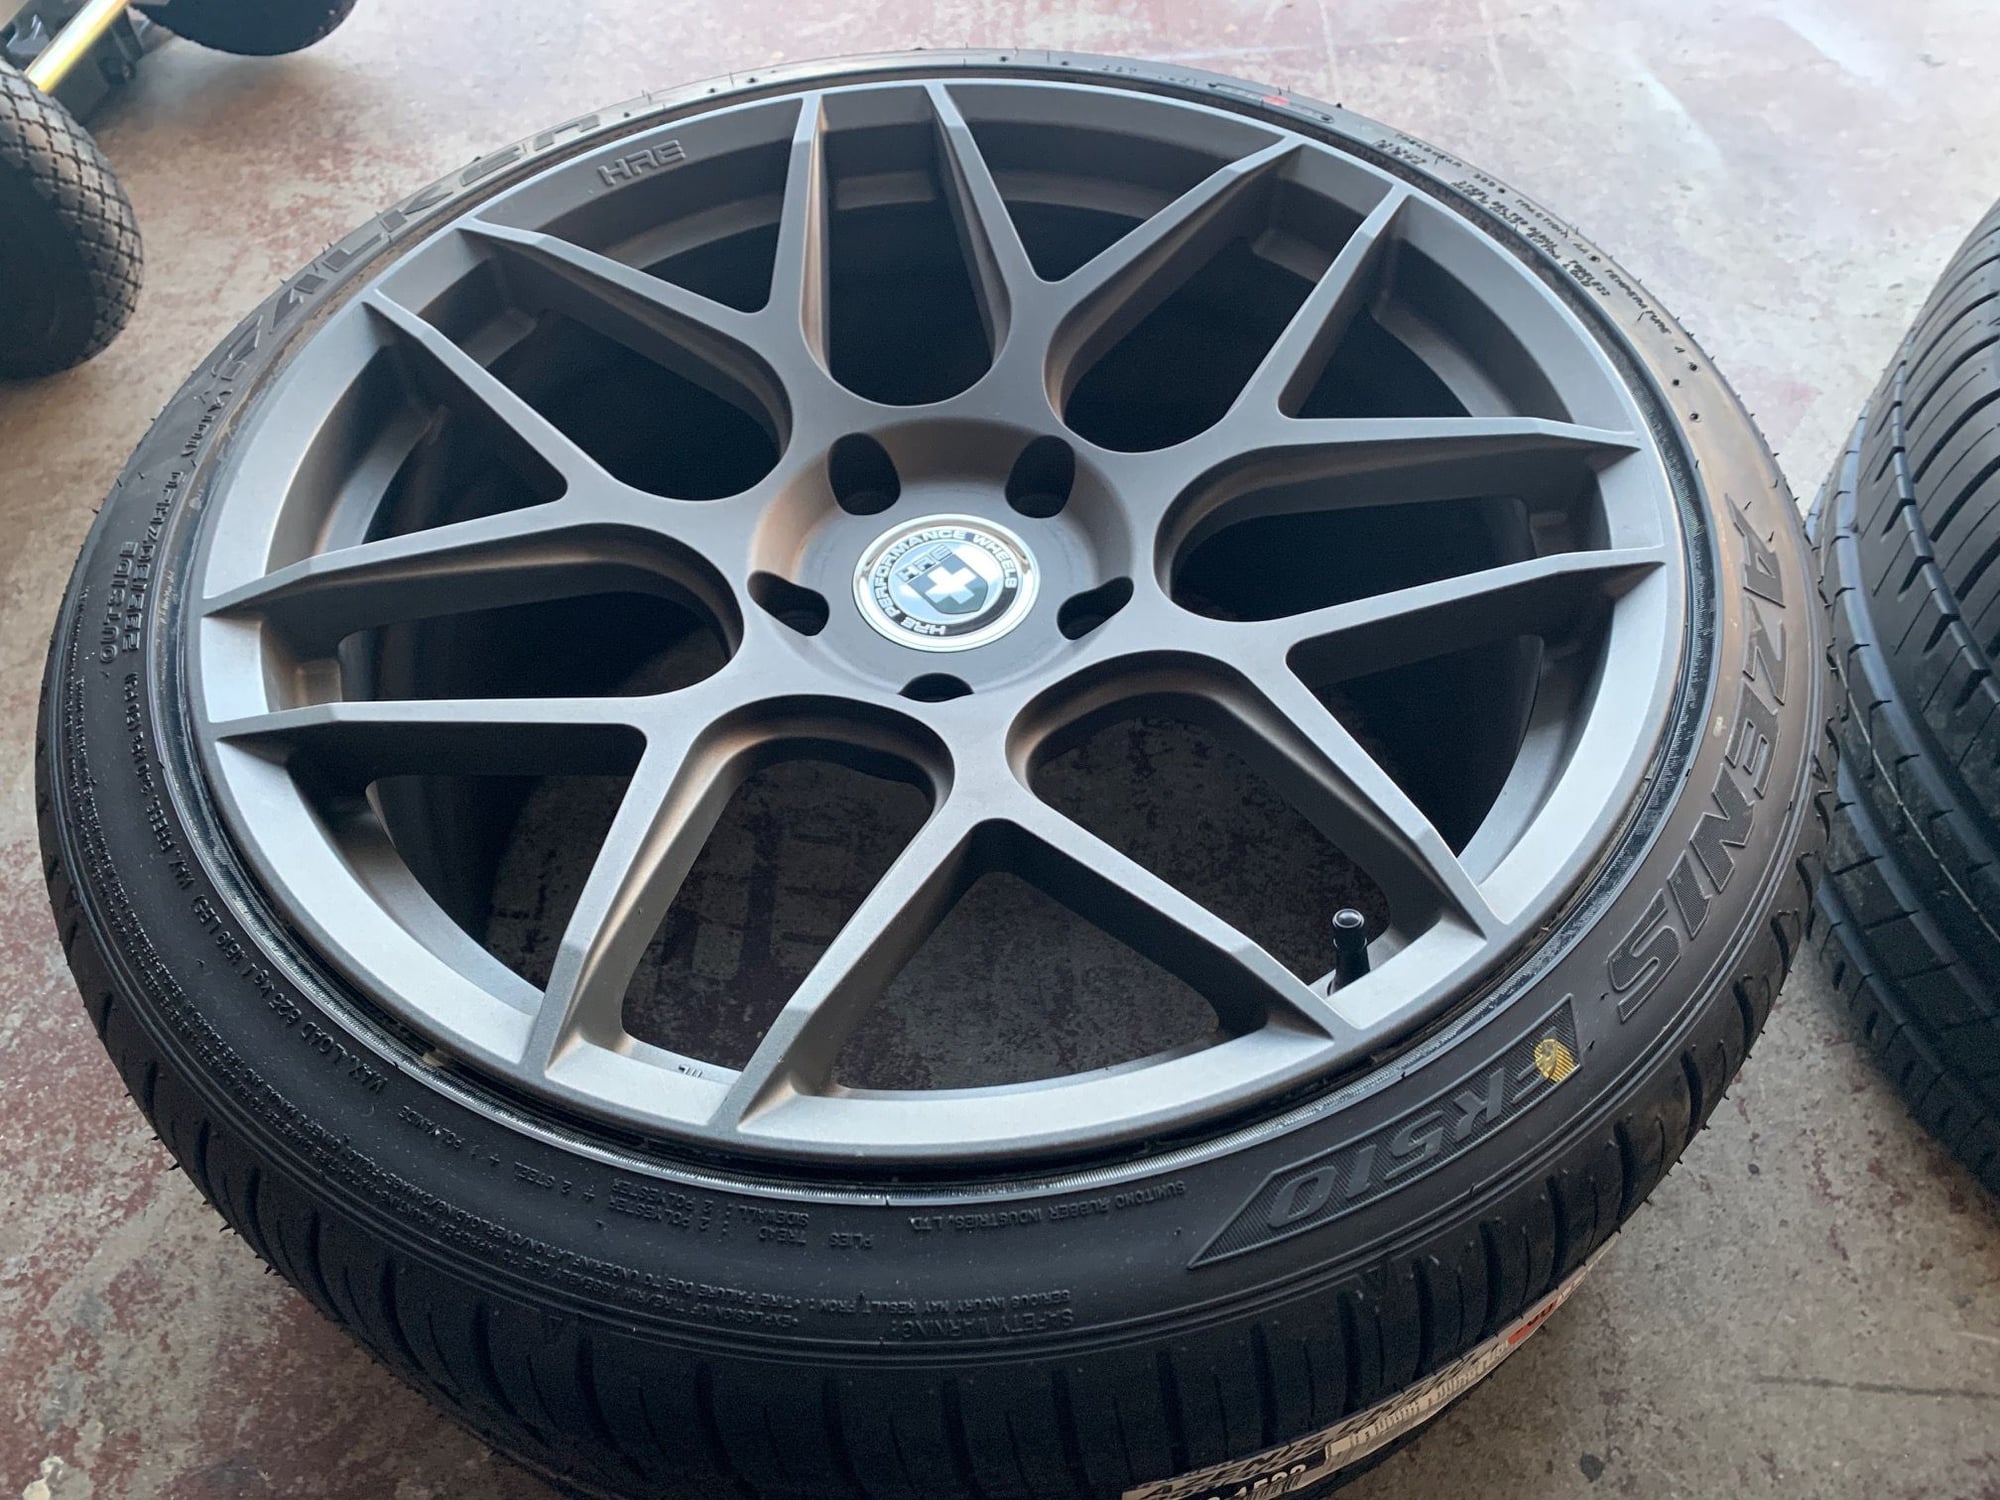 Wheels and Tires/Axles - 20" HRE FF01 w/tires - Used - 2000 to 2019 Porsche 911 - Fremont, CA 94538, United States